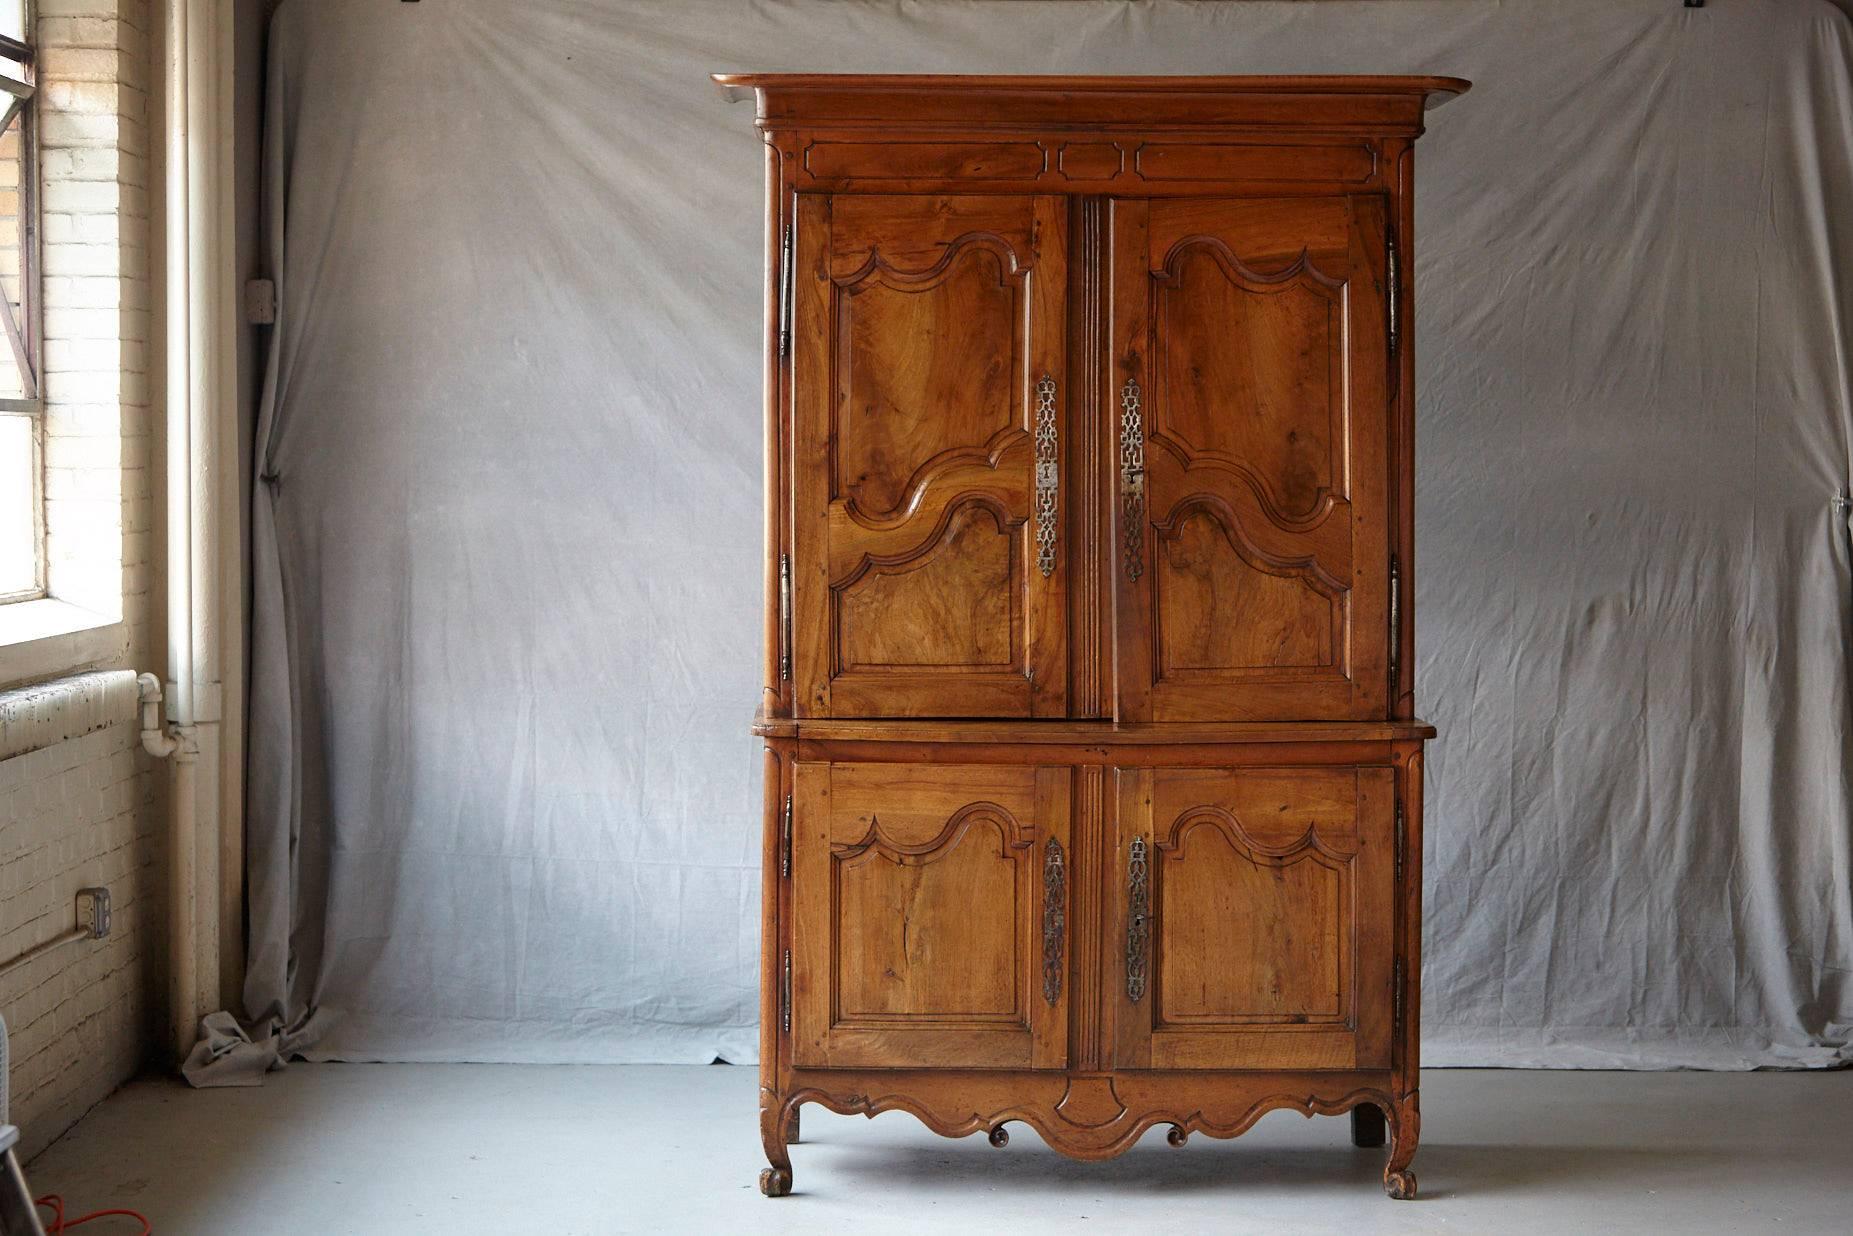 Extraordinary French 18th century Louis XV style fruitwood cabinet a deux corps. The upper section recessed and with a molded overhanging cornice above a simple paneled frieze and twin decoratively paneled cupboard doors enclosing shelving covered